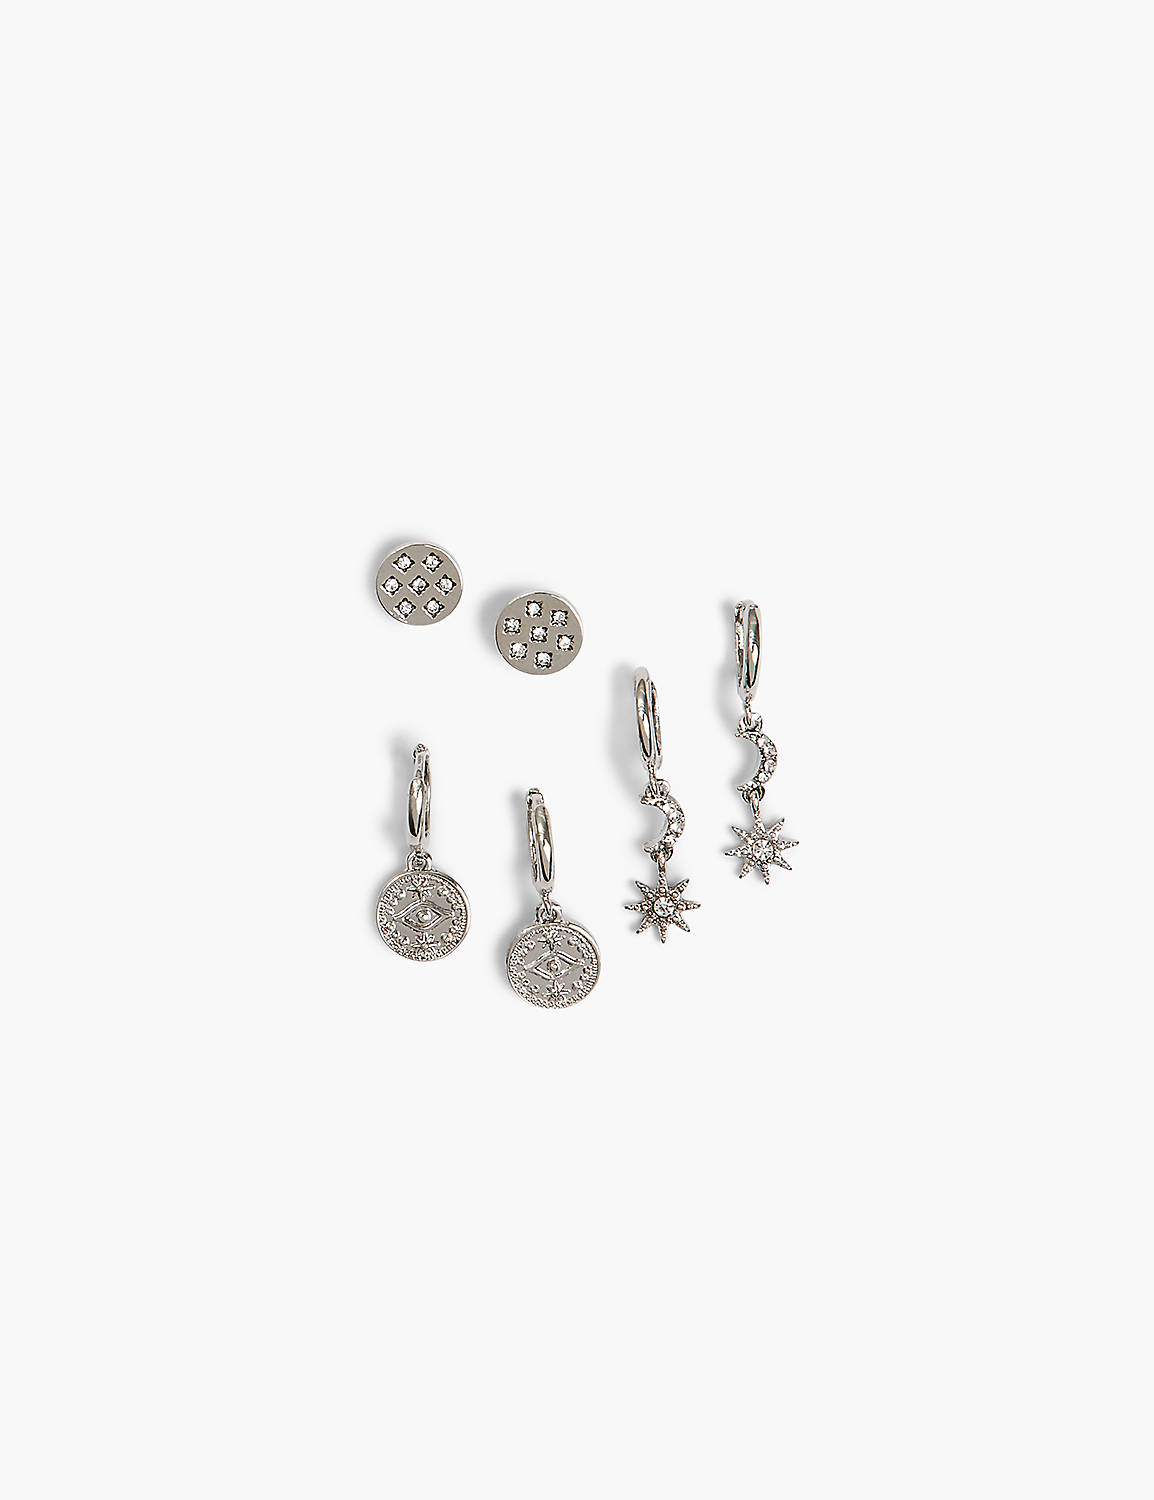 Celestial Charm Earrings 3 Pack Product Image 1